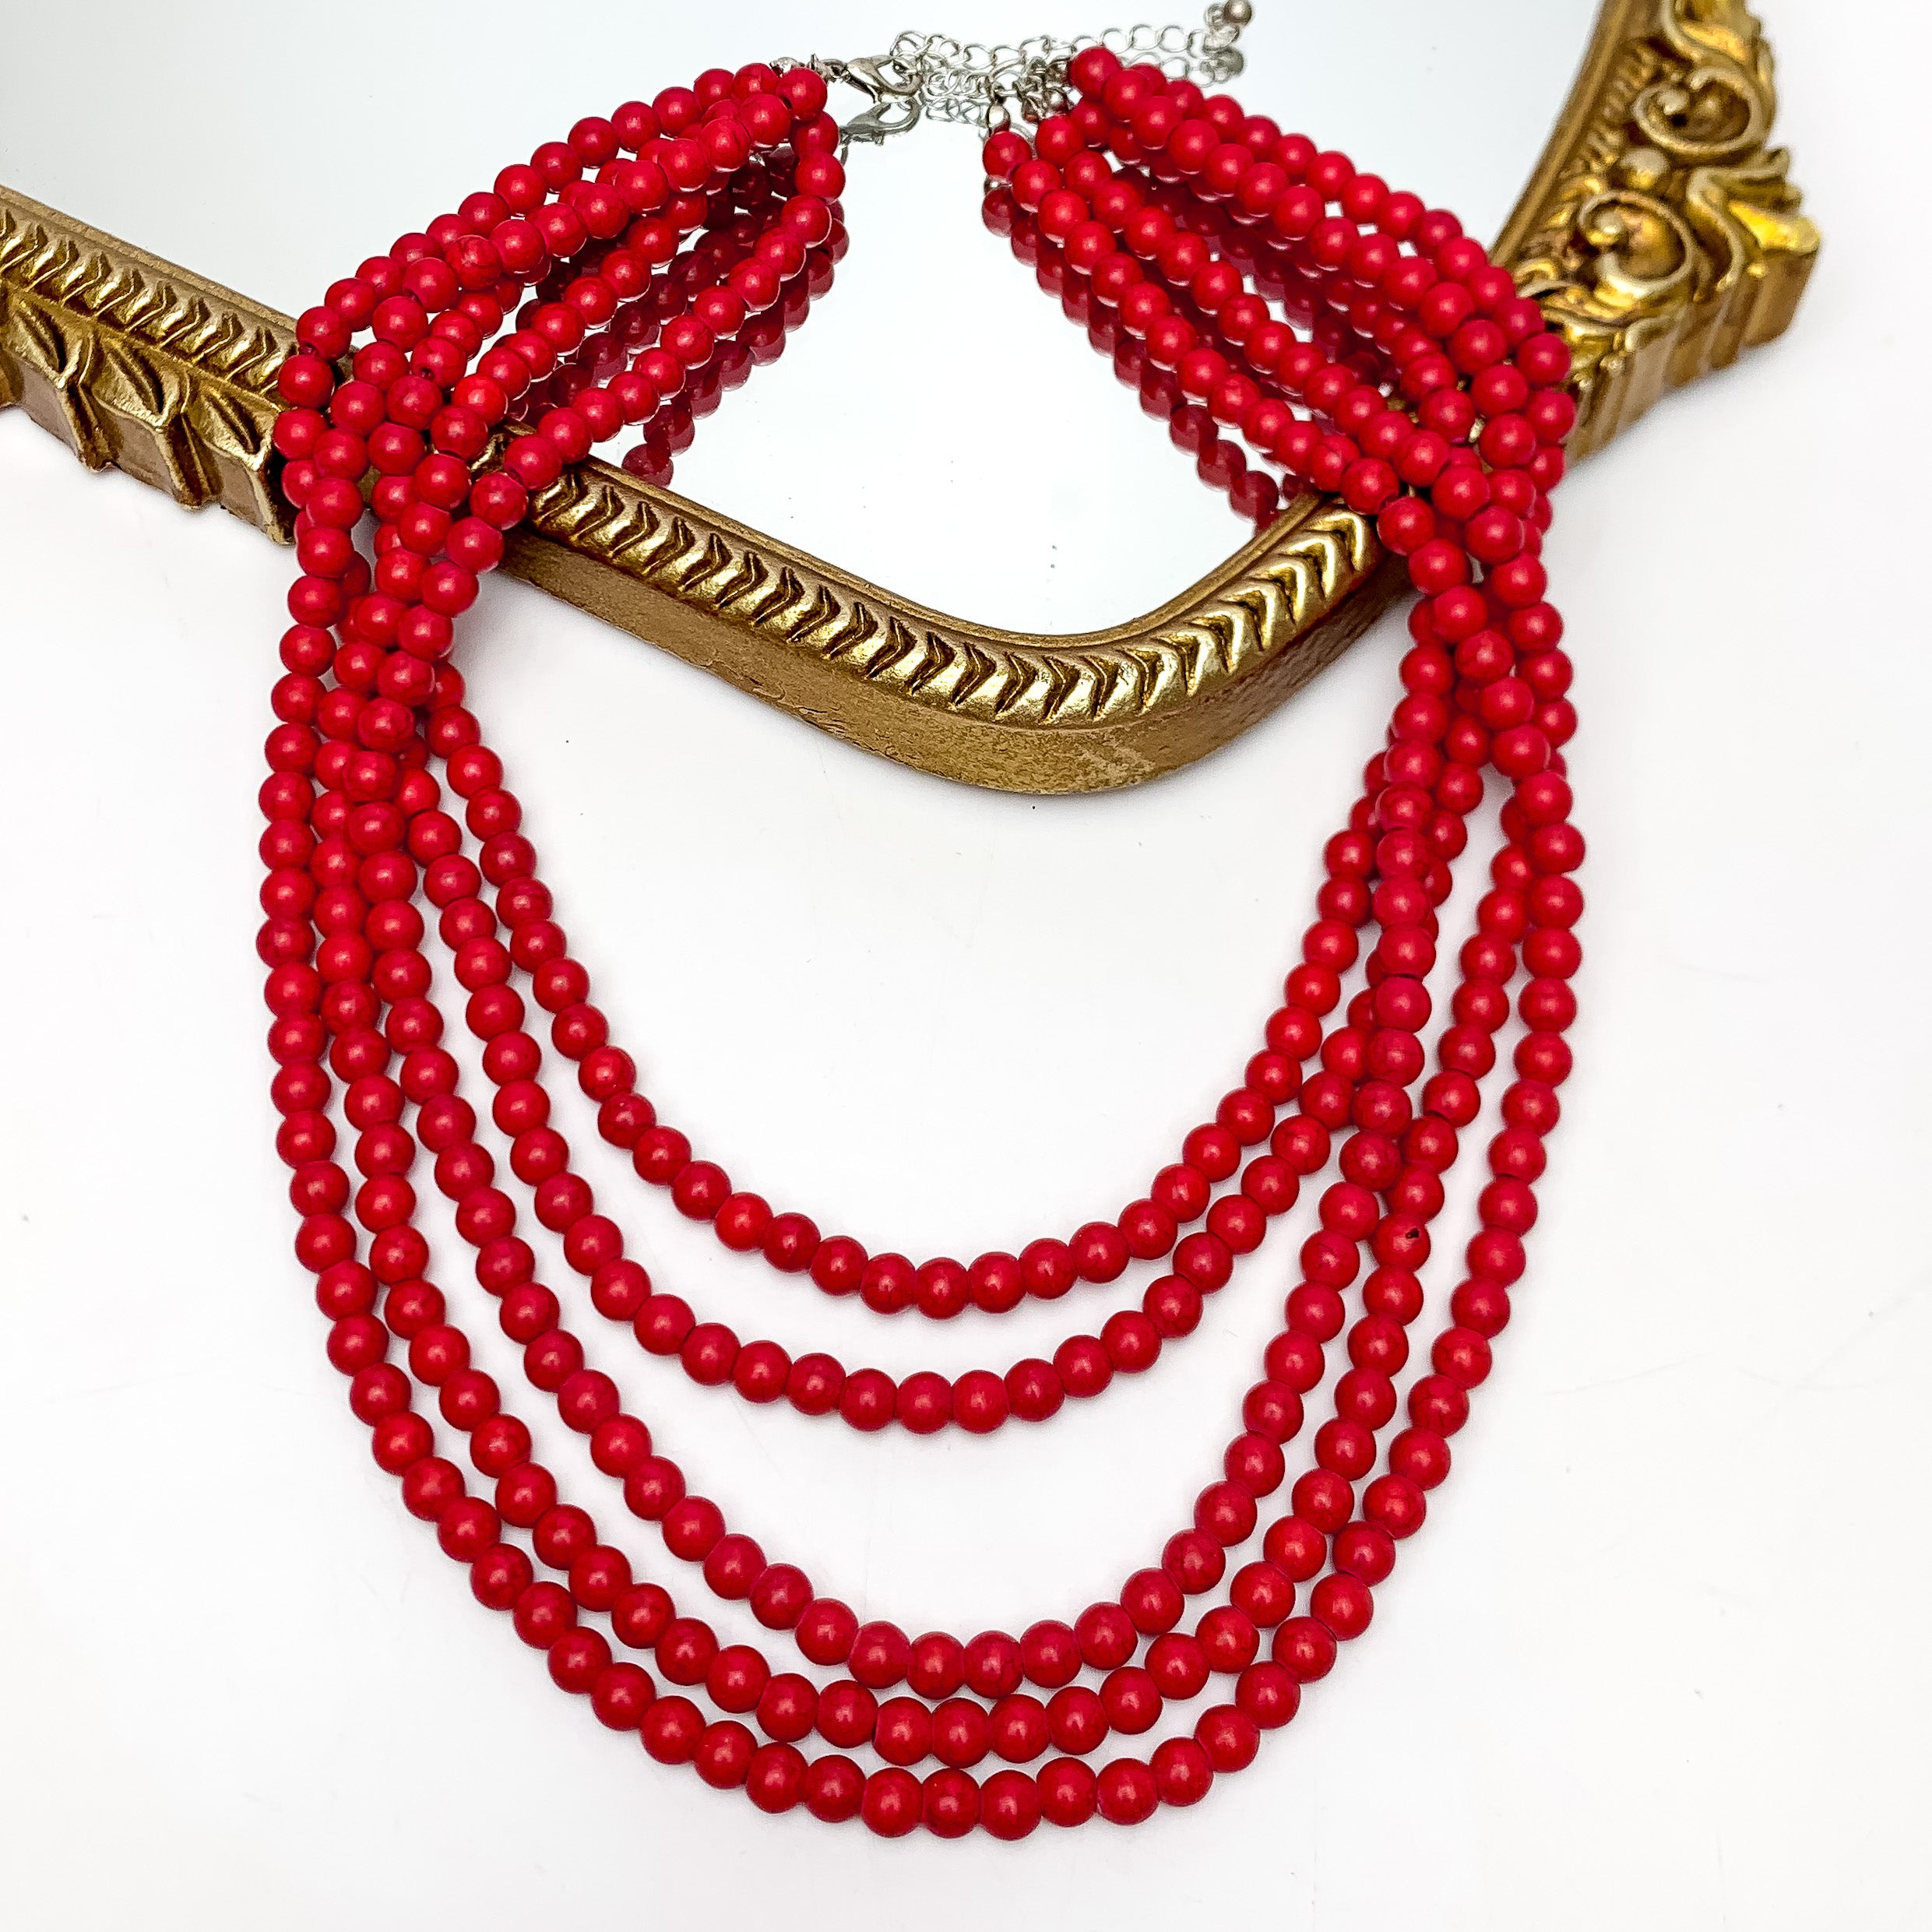  Five Strand Red Beaded Necklace. This necklace is pictured on a white background with part of it on a gold trimmed mirror.